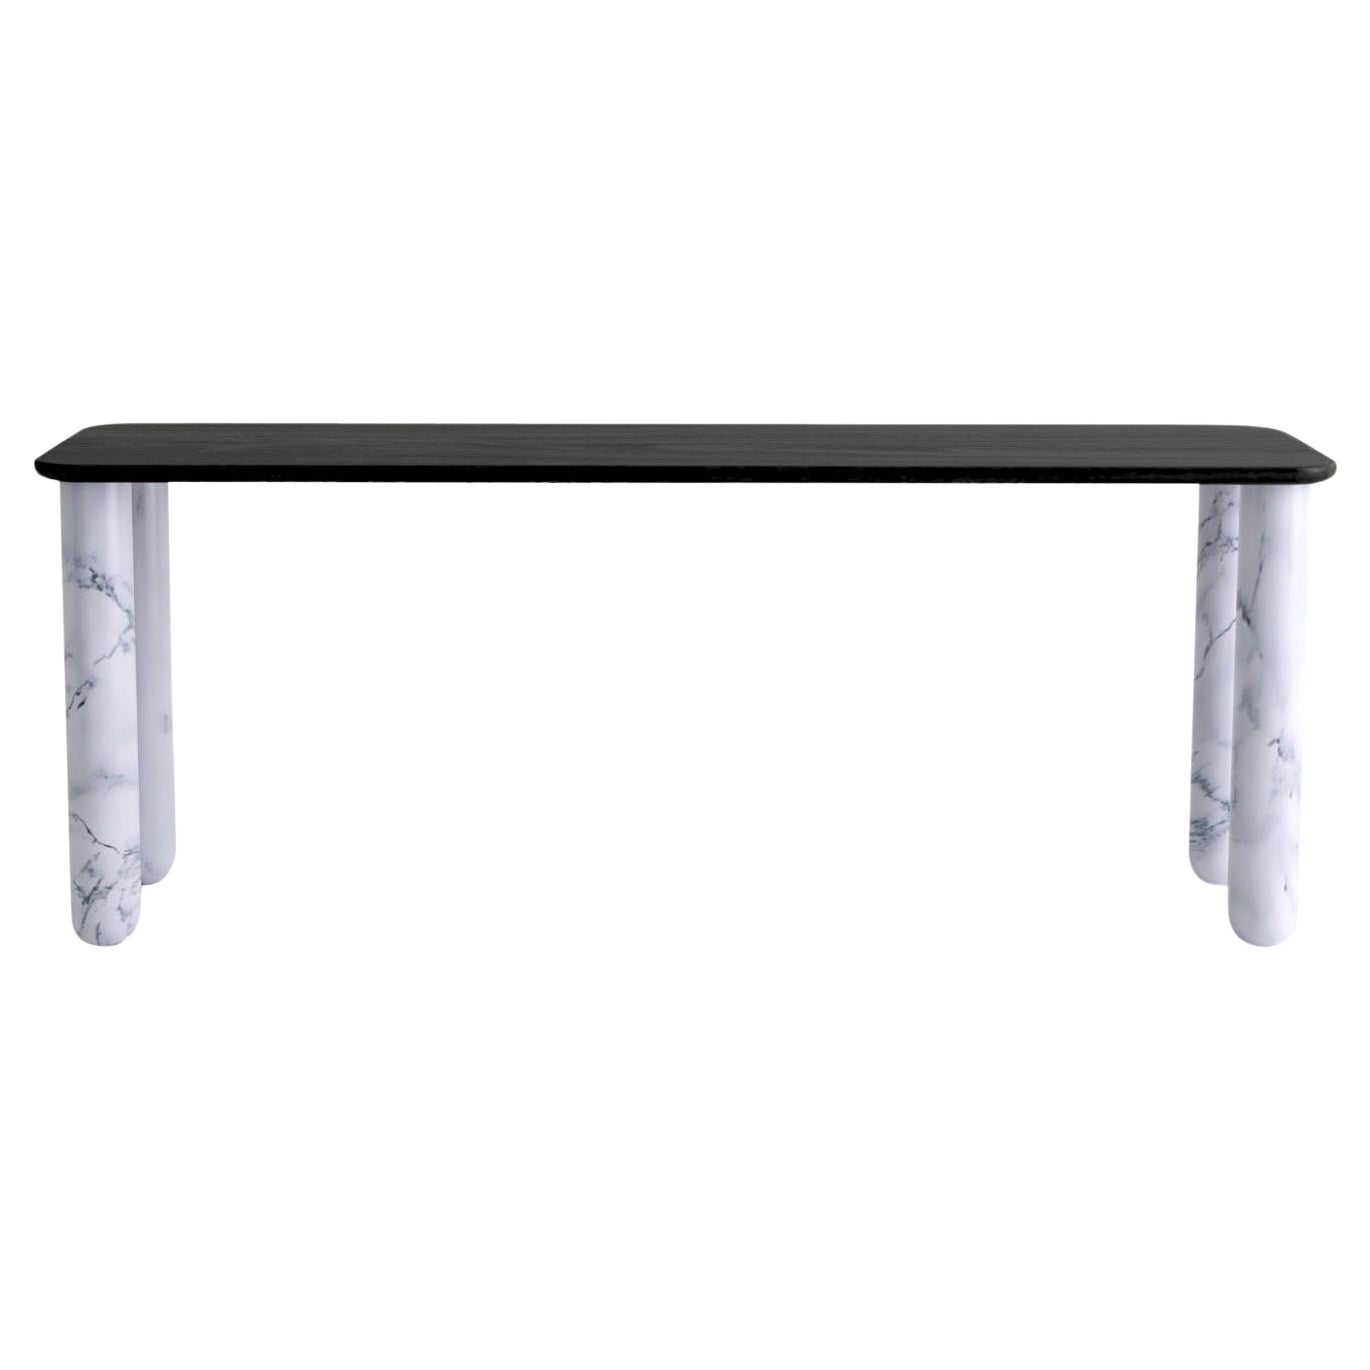 Large Black Wood and White Marble "Sunday" Dining Table, Jean-Baptiste Souletie